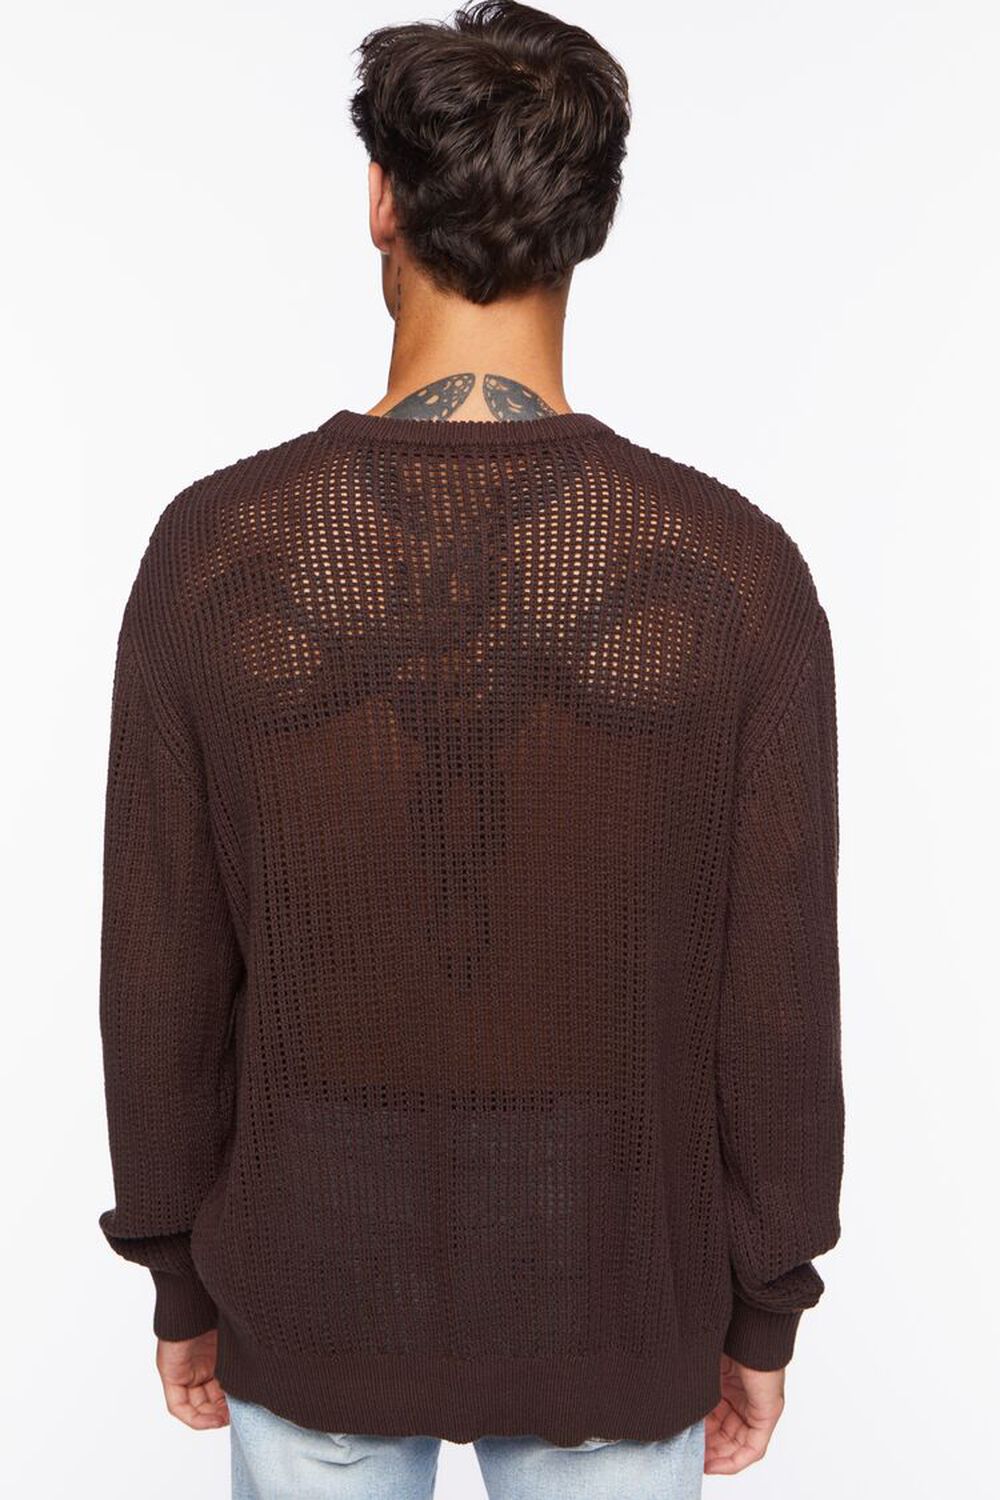 COCOA Open-Knit Crew Sweater, image 3